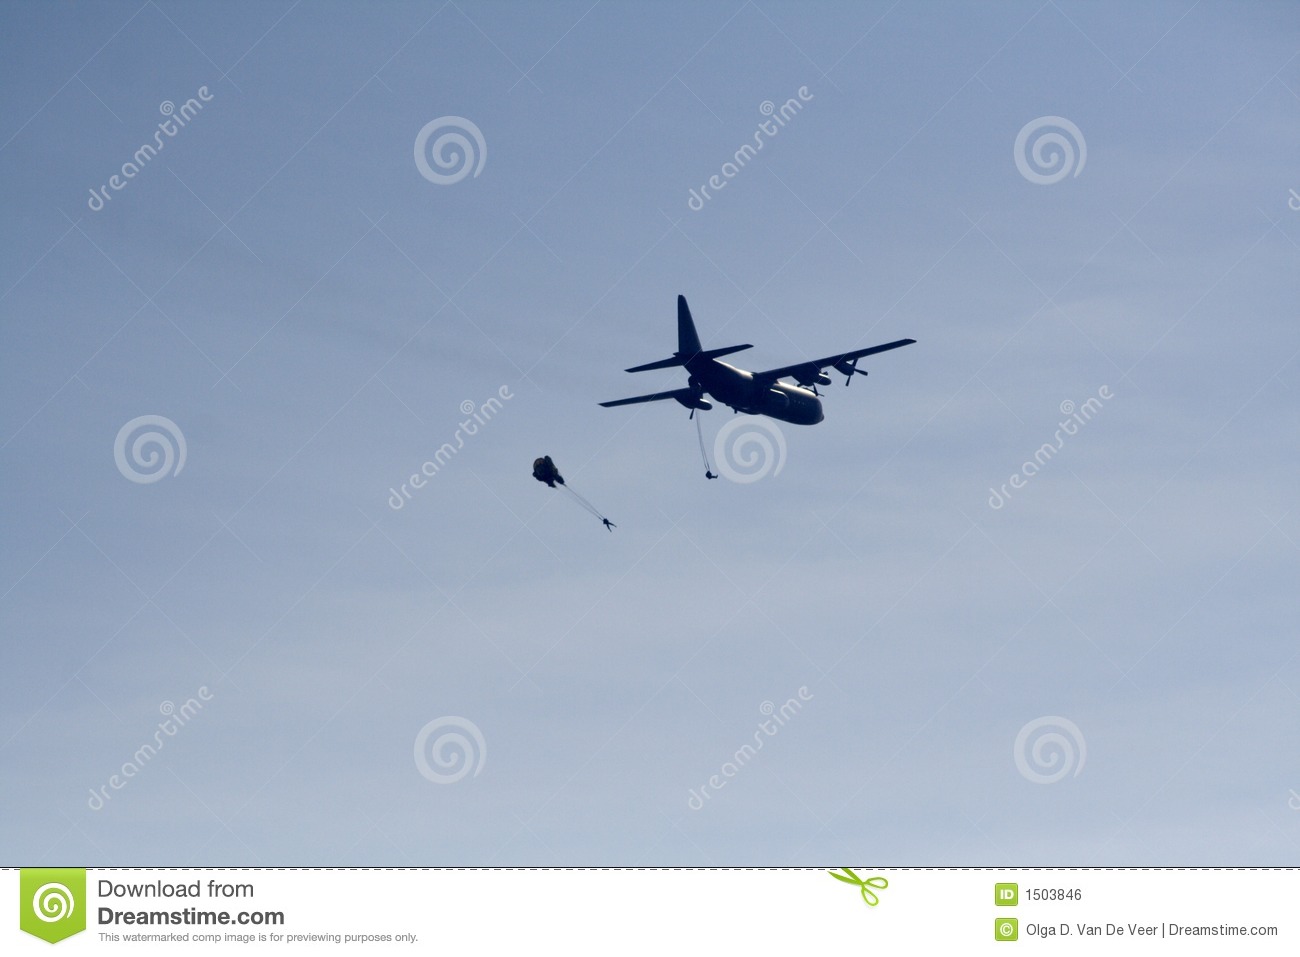 Paratroopers And Hercules Plane Royalty Free Stock Image   Image    